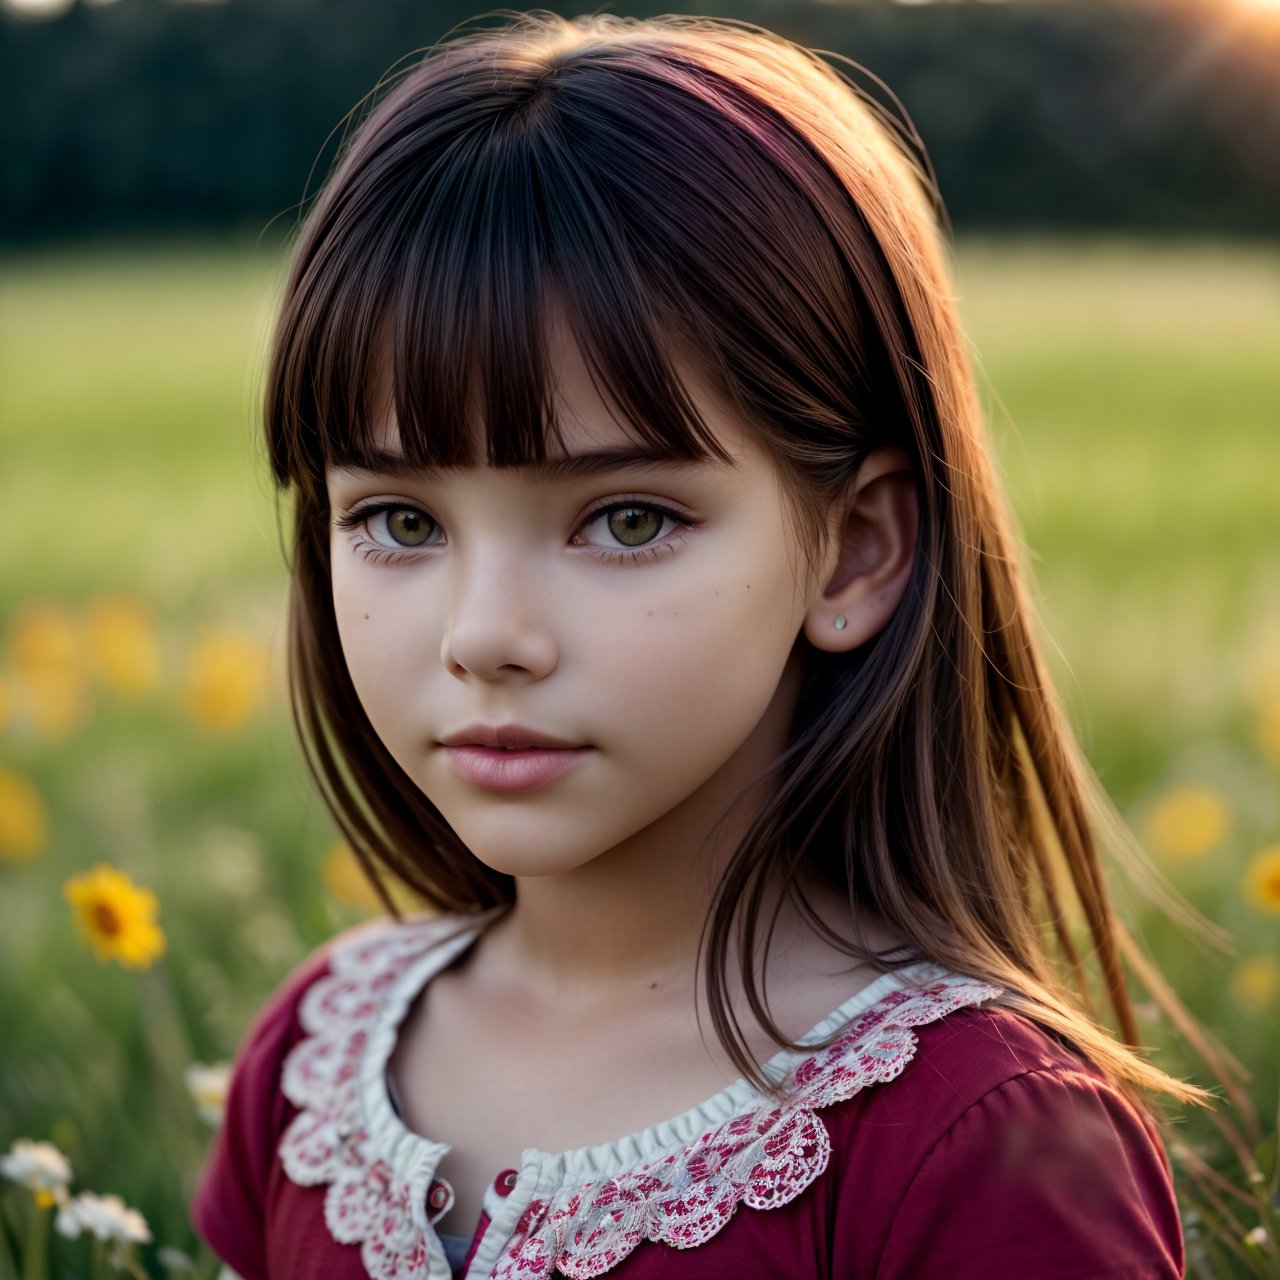 (masterpiece:1.3), best quality, extra resolution, wallpaper, HD quality, HD, HQ, 4K, dolly short of self-assurance (AIDA_LoRA_LG2014:1.1) <lora:AIDA_LoRA_LG2014:0.74> as little girl in a simple red t-shirt in the field, pretty face, (eyes with dark iris:1.1), insane level of details, kkw-ph1, hdr, f1.8, (colorful:1.1), sunlight